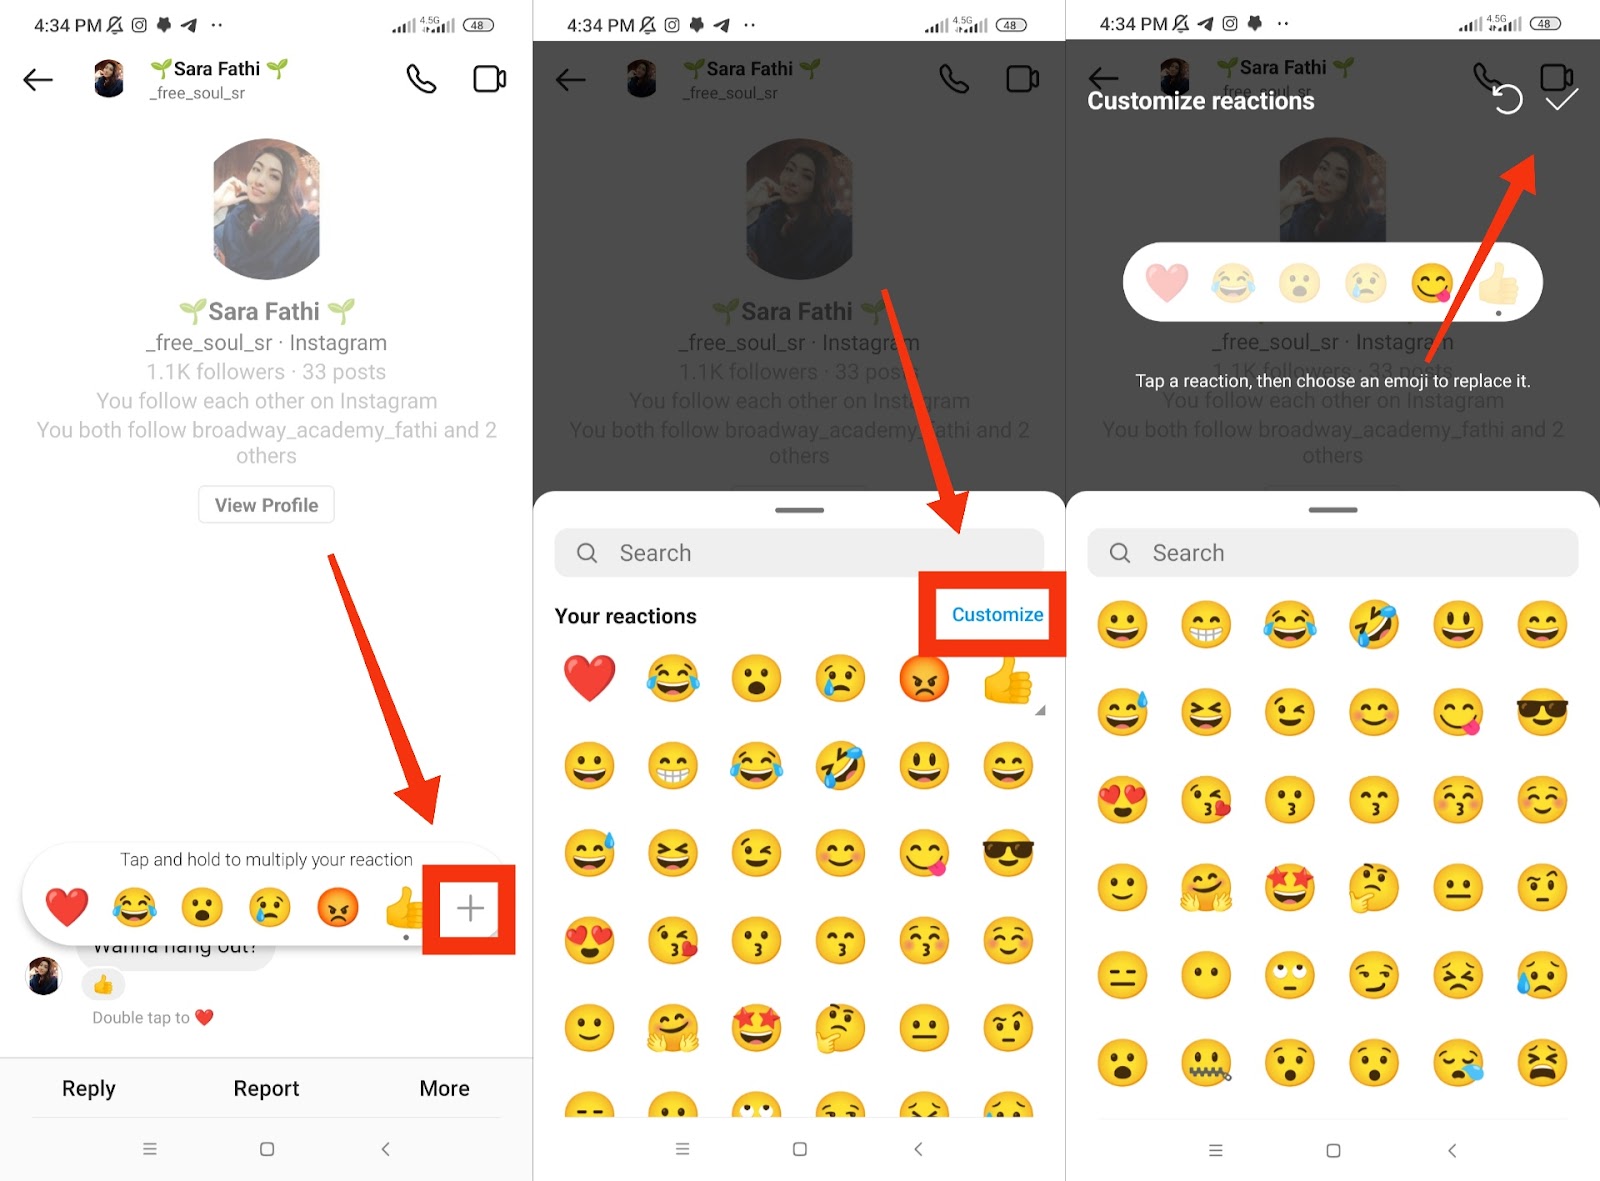 how to react with different emojis on Instagram